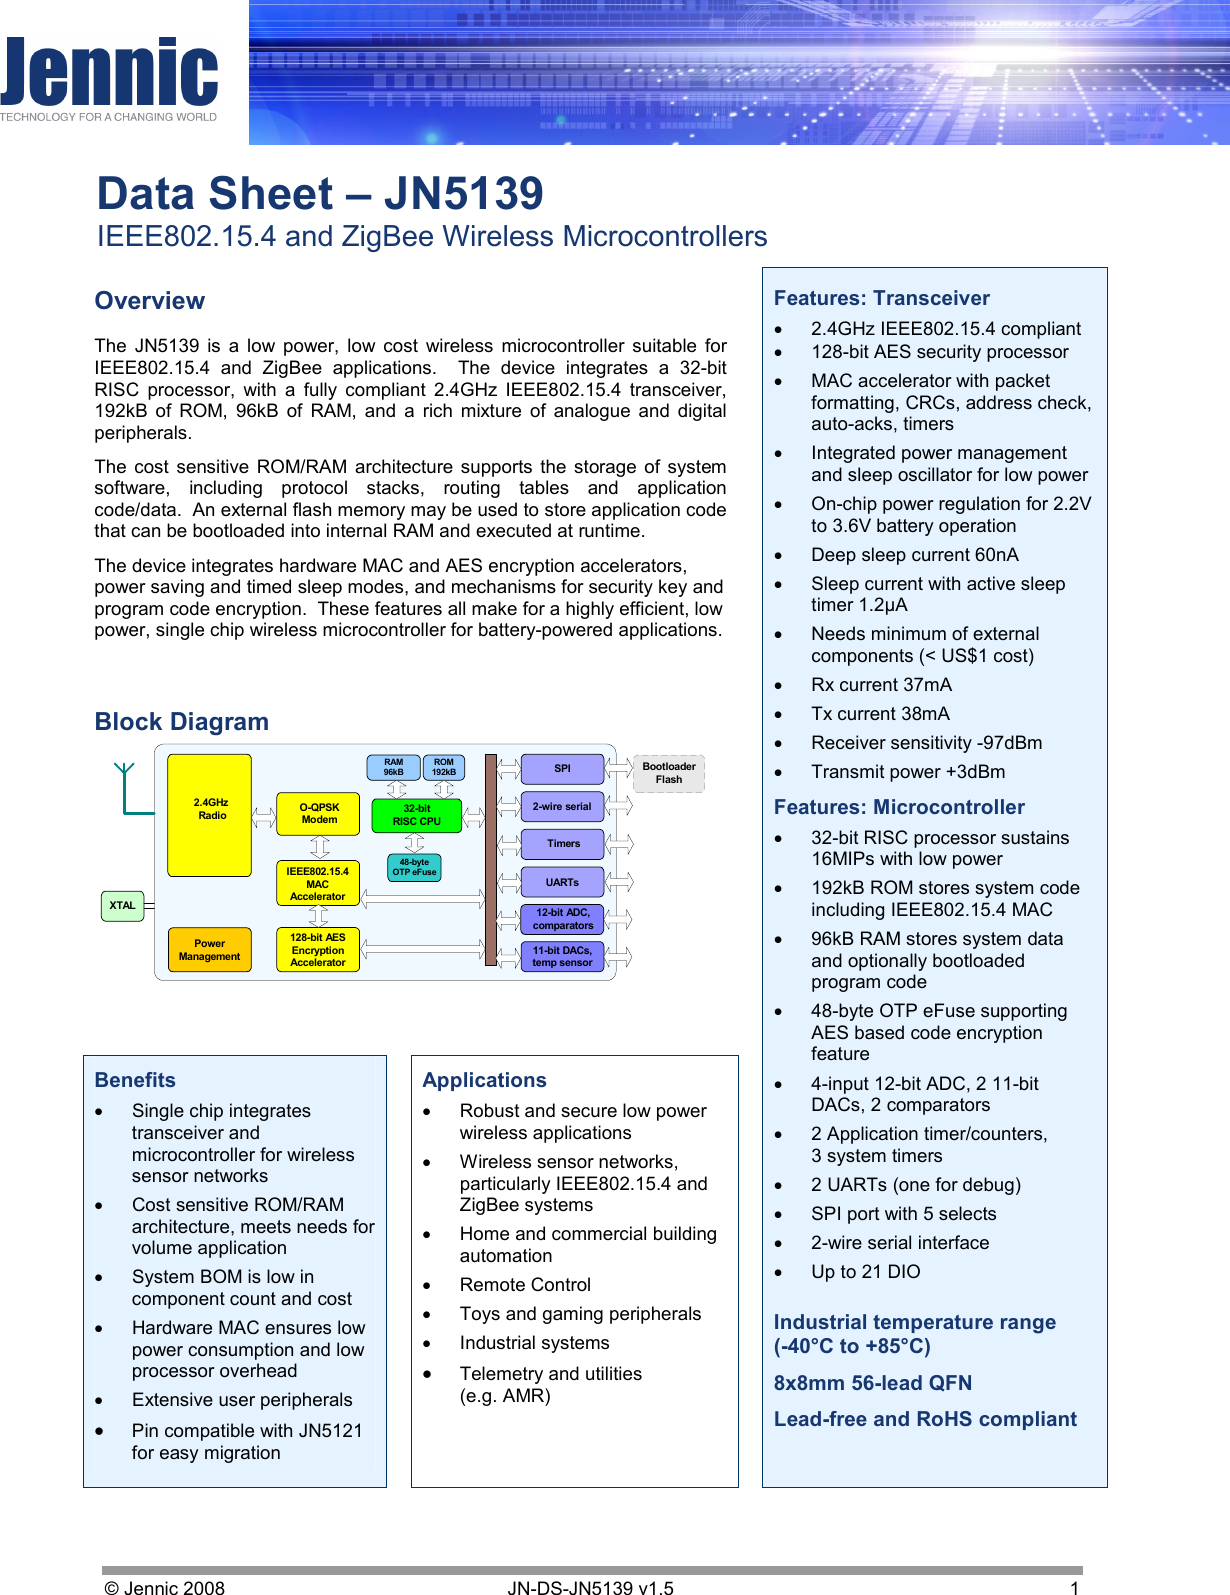     Data Sheet – JN5139 IEEE802.15.4 and ZigBee Wireless Microcontrollers © Jennic 2008        JN-DS-JN5139 v1.5  1     Overview The  JN5139  is  a  low  power,  low  cost  wireless  microcontroller  suitable  for IEEE802.15.4  and  ZigBee  applications.    The  device  integrates  a  32-bit RISC  processor,  with  a  fully  compliant  2.4GHz  IEEE802.15.4  transceiver, 192kB  of  ROM,  96kB  of  RAM,  and  a  rich  mixture  of  analogue  and  digital peripherals.  The cost sensitive  ROM/RAM architecture supports  the storage  of system software,  including  protocol  stacks,  routing  tables  and  application code/data.  An external flash memory may be used to store application code that can be bootloaded into internal RAM and executed at runtime. The device integrates hardware MAC and AES encryption accelerators, power saving and timed sleep modes, and mechanisms for security key and program code encryption.  These features all make for a highly efficient, low power, single chip wireless microcontroller for battery-powered applications.  Block Diagram    Benefits •  Single chip integrates transceiver and microcontroller for wireless sensor networks •  Cost sensitive ROM/RAM architecture, meets needs for volume application •  System BOM is low in component count and cost •  Hardware MAC ensures low power consumption and low processor overhead •  Extensive user peripherals • Pin compatible with JN5121 for easy migration  Applications •  Robust and secure low power wireless applications •  Wireless sensor networks, particularly IEEE802.15.4 and ZigBee systems •  Home and commercial building automation •  Remote Control •  Toys and gaming peripherals •  Industrial systems • Telemetry and utilities (e.g. AMR)  Features: Transceiver •  2.4GHz IEEE802.15.4 compliant •  128-bit AES security processor  •  MAC accelerator with packet formatting, CRCs, address check, auto-acks, timers •  Integrated power management and sleep oscillator for low power •  On-chip power regulation for 2.2V to 3.6V battery operation •  Deep sleep current 60nA •  Sleep current with active sleep timer 1.2µA •  Needs minimum of external components (&lt; US$1 cost) •  Rx current 37mA •  Tx current 38mA •  Receiver sensitivity -97dBm •  Transmit power +3dBm Features: Microcontroller •  32-bit RISC processor sustains 16MIPs with low power  •  192kB ROM stores system code including IEEE802.15.4 MAC •  96kB RAM stores system data and optionally bootloaded program code •  48-byte OTP eFuse supporting  AES based code encryption feature •  4-input 12-bit ADC, 2 11-bit DACs, 2 comparators •  2 Application timer/counters,  3 system timers •  2 UARTs (one for debug) •  SPI port with 5 selects •  2-wire serial interface •  Up to 21 DIO  Industrial temperature range (-40°C to +85°C) 8x8mm 56-lead QFN Lead-free and RoHS compliant 32-bitRISC CPUTimersUARTs12-bit ADC,comparators11-bit DACs,temp sensor2-wire serialSPIRAM96kB128-bit AESEncryptionAccelerator2.4GHz RadioROM192kBPowerManagementXTALO-QPSKModemIEEE802.15.4MACAcceleratorBootloaderFlash48-byteOTP eFuse